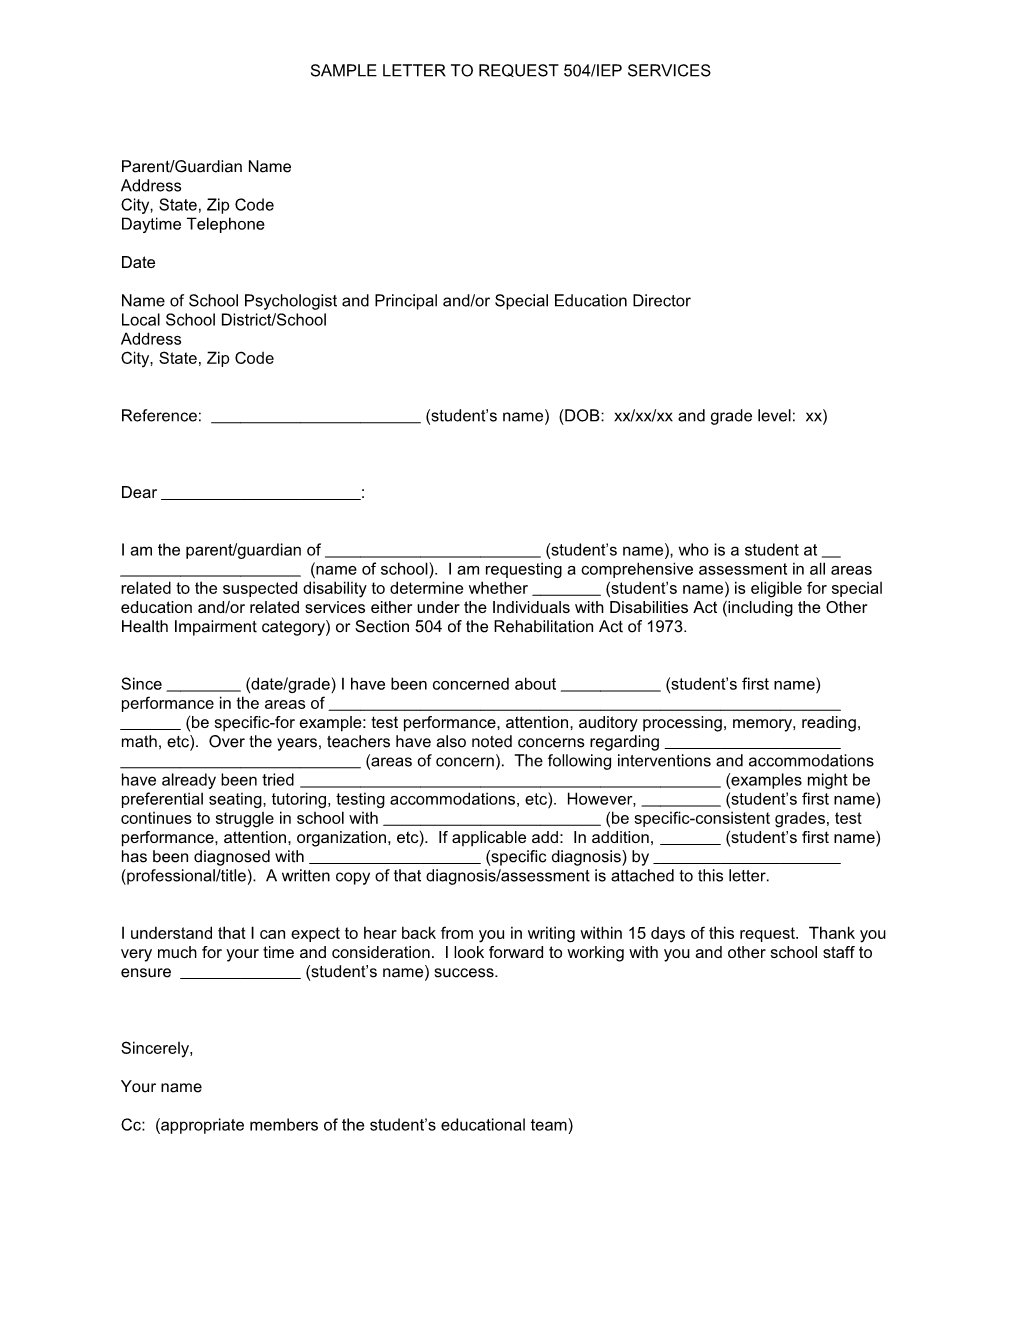 Sample Letter To Request 504/Iep Services